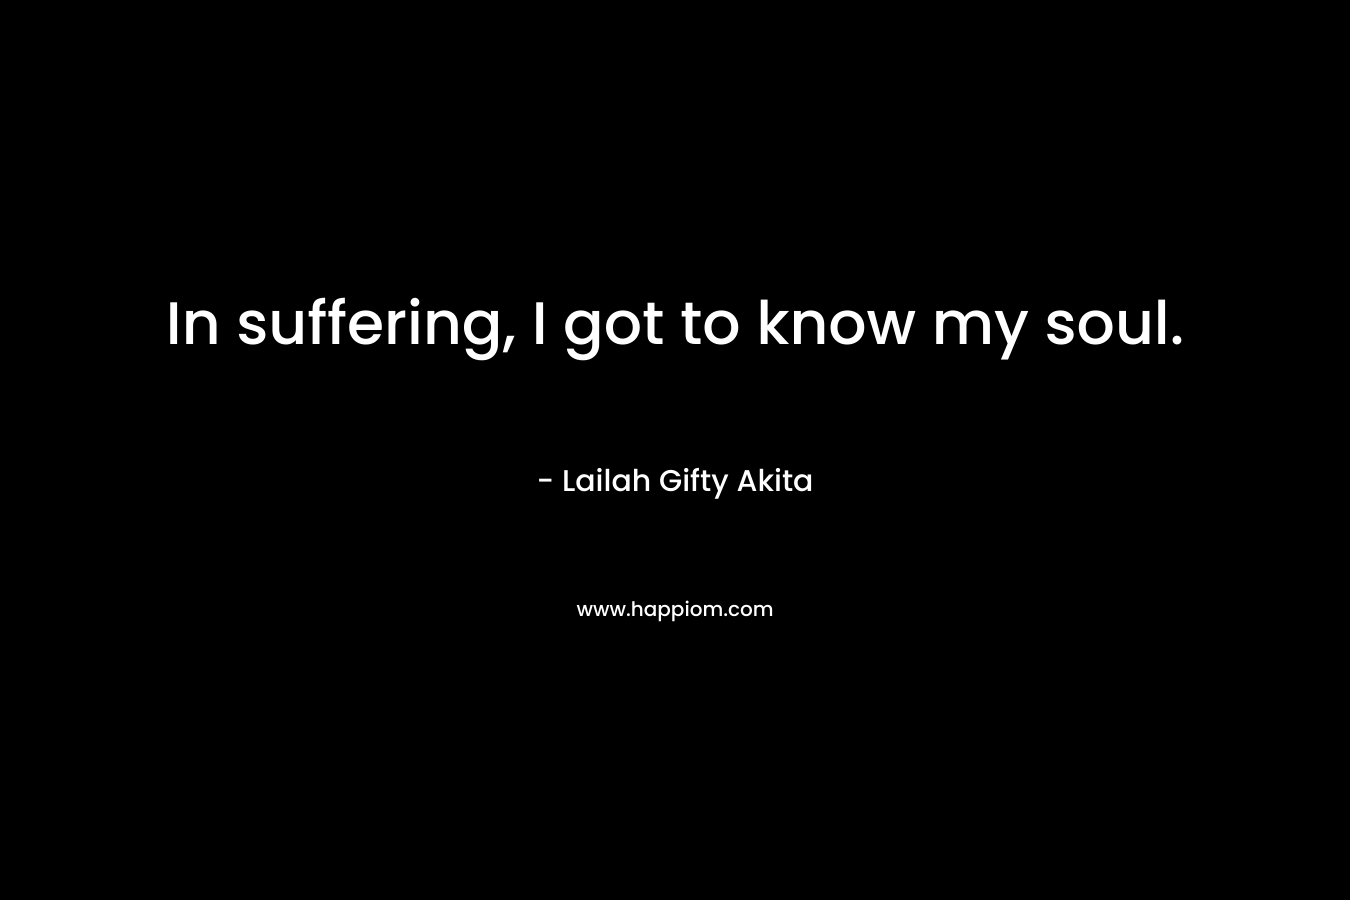 In suffering, I got to know my soul.